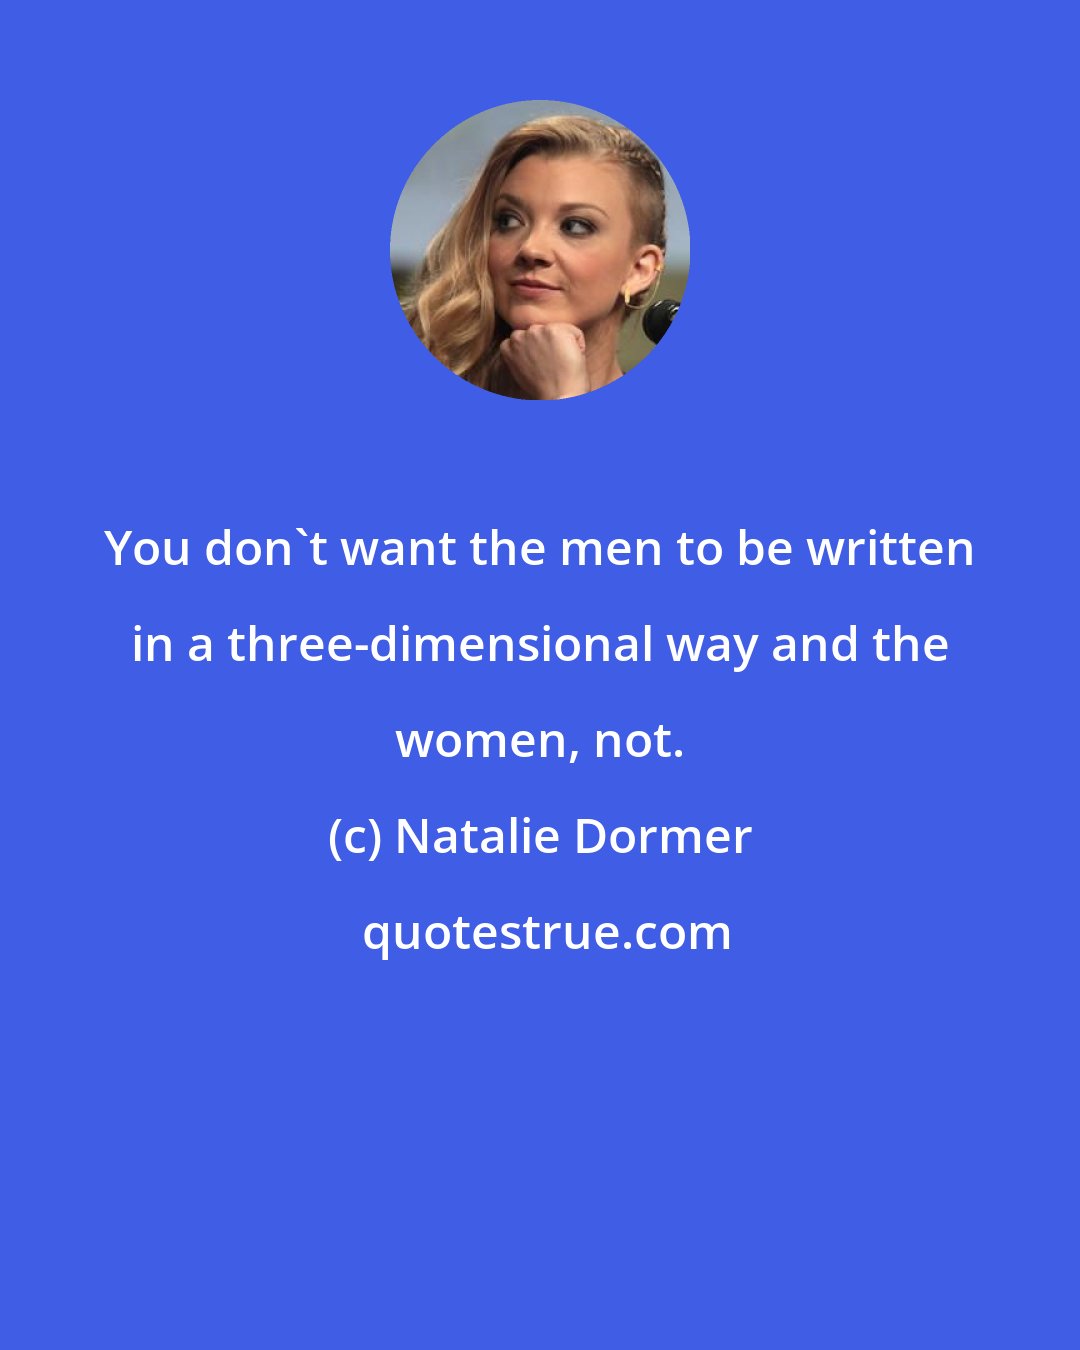 Natalie Dormer: You don't want the men to be written in a three-dimensional way and the women, not.